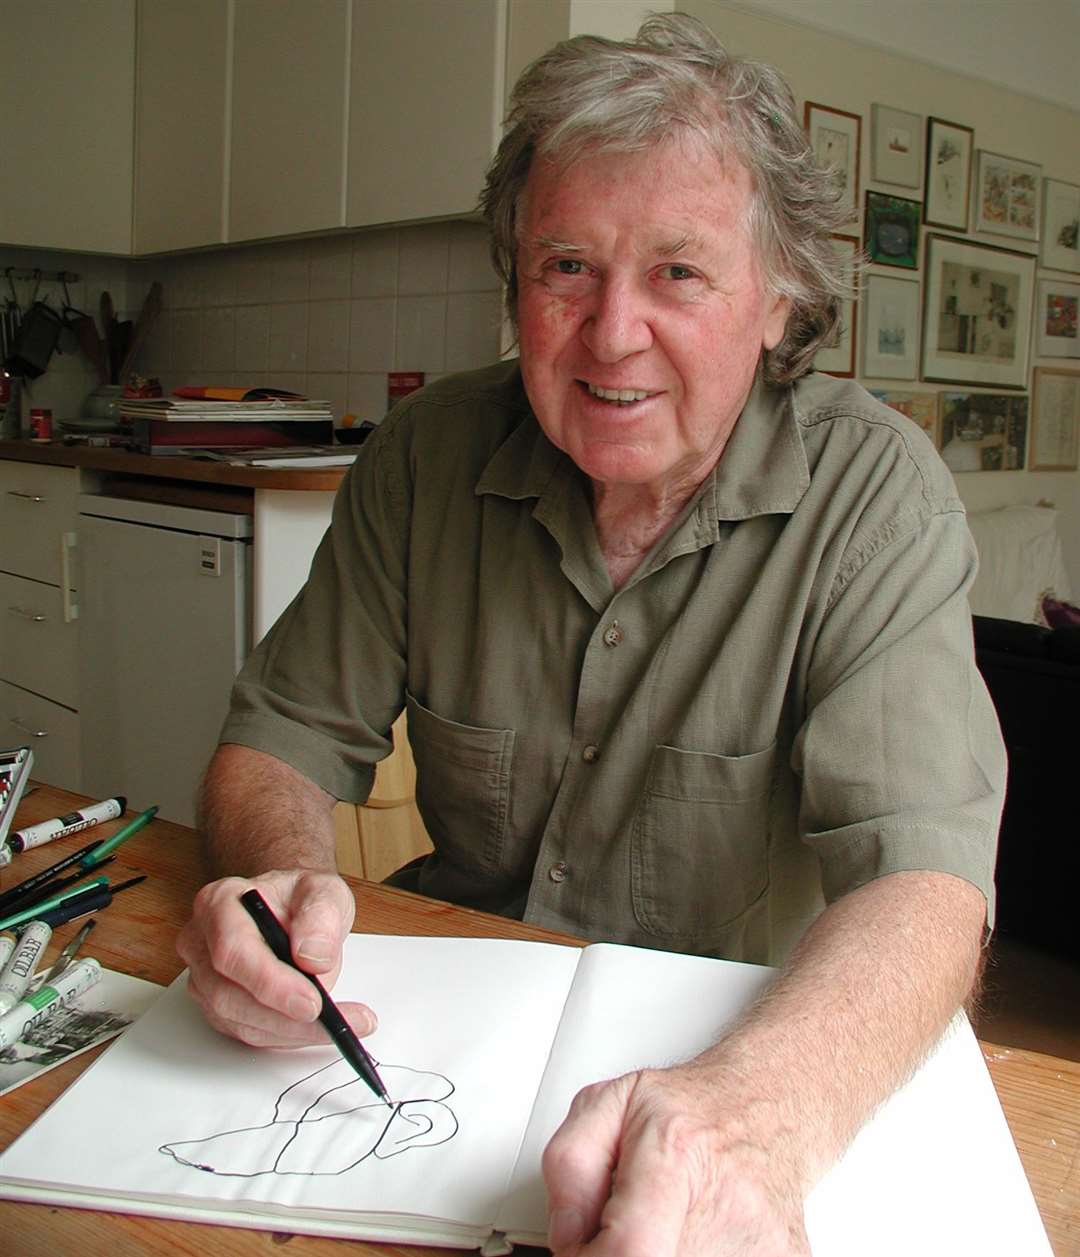 David McKee wrote and illustrated the first Elmer book in 1968.